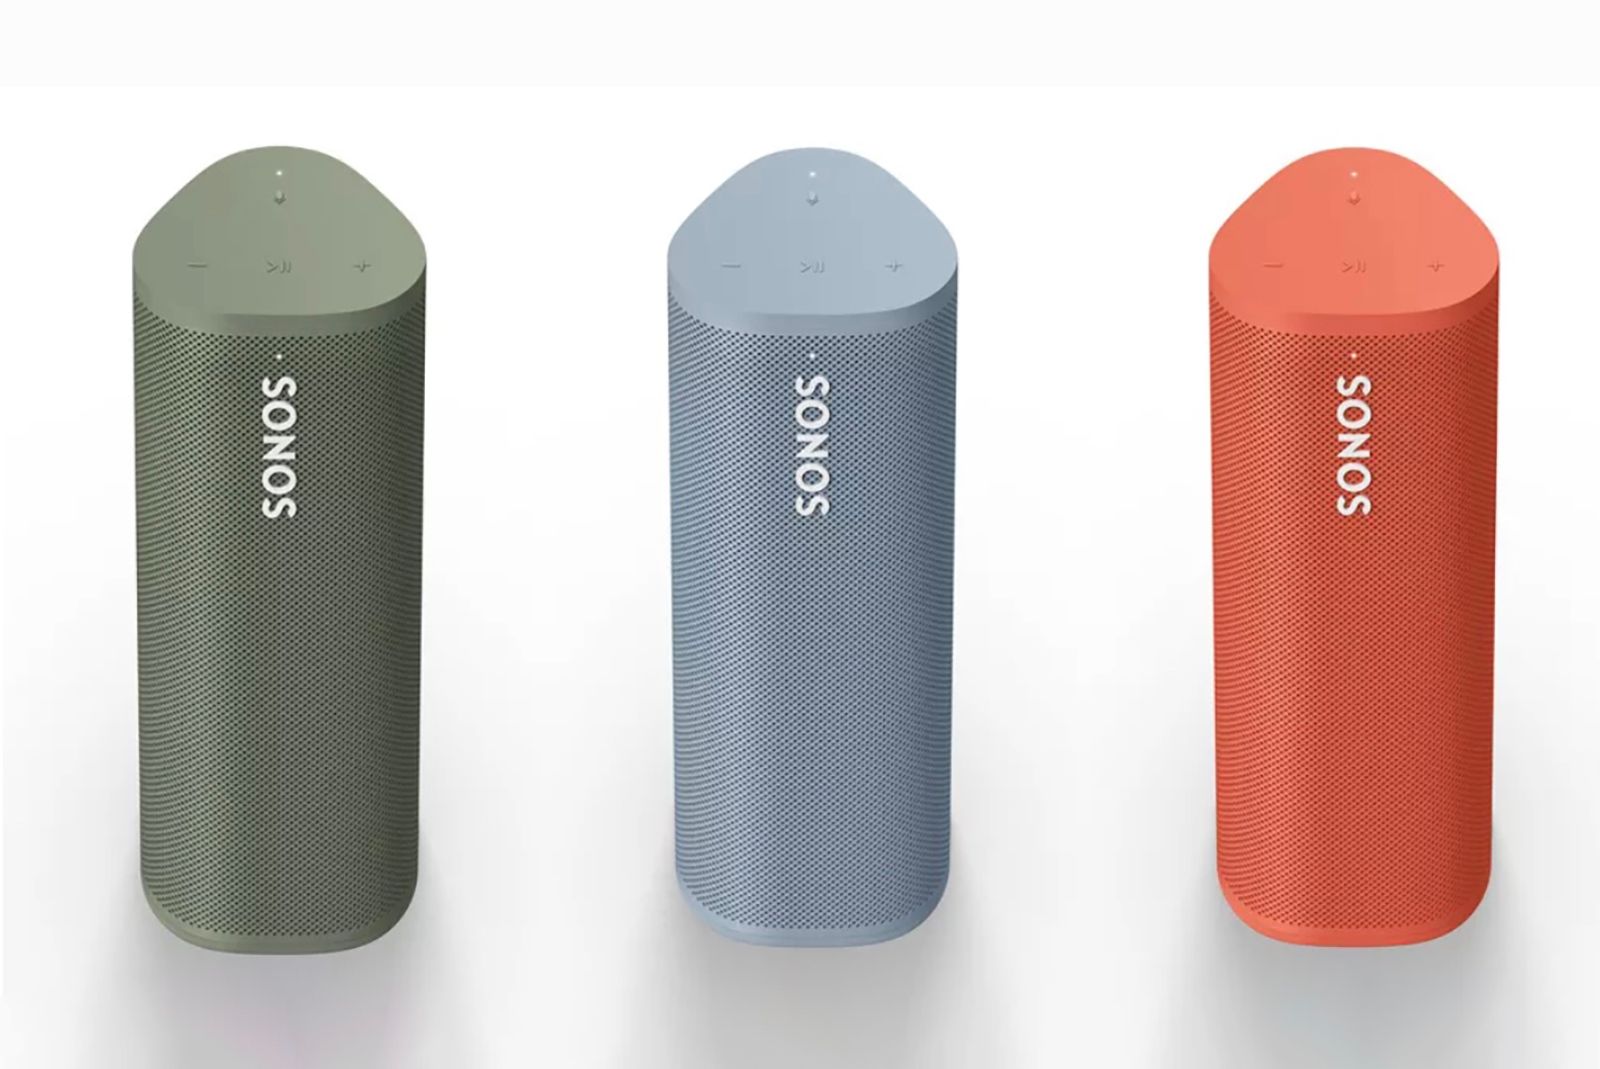 Sonos Roam is about get three bright new colours